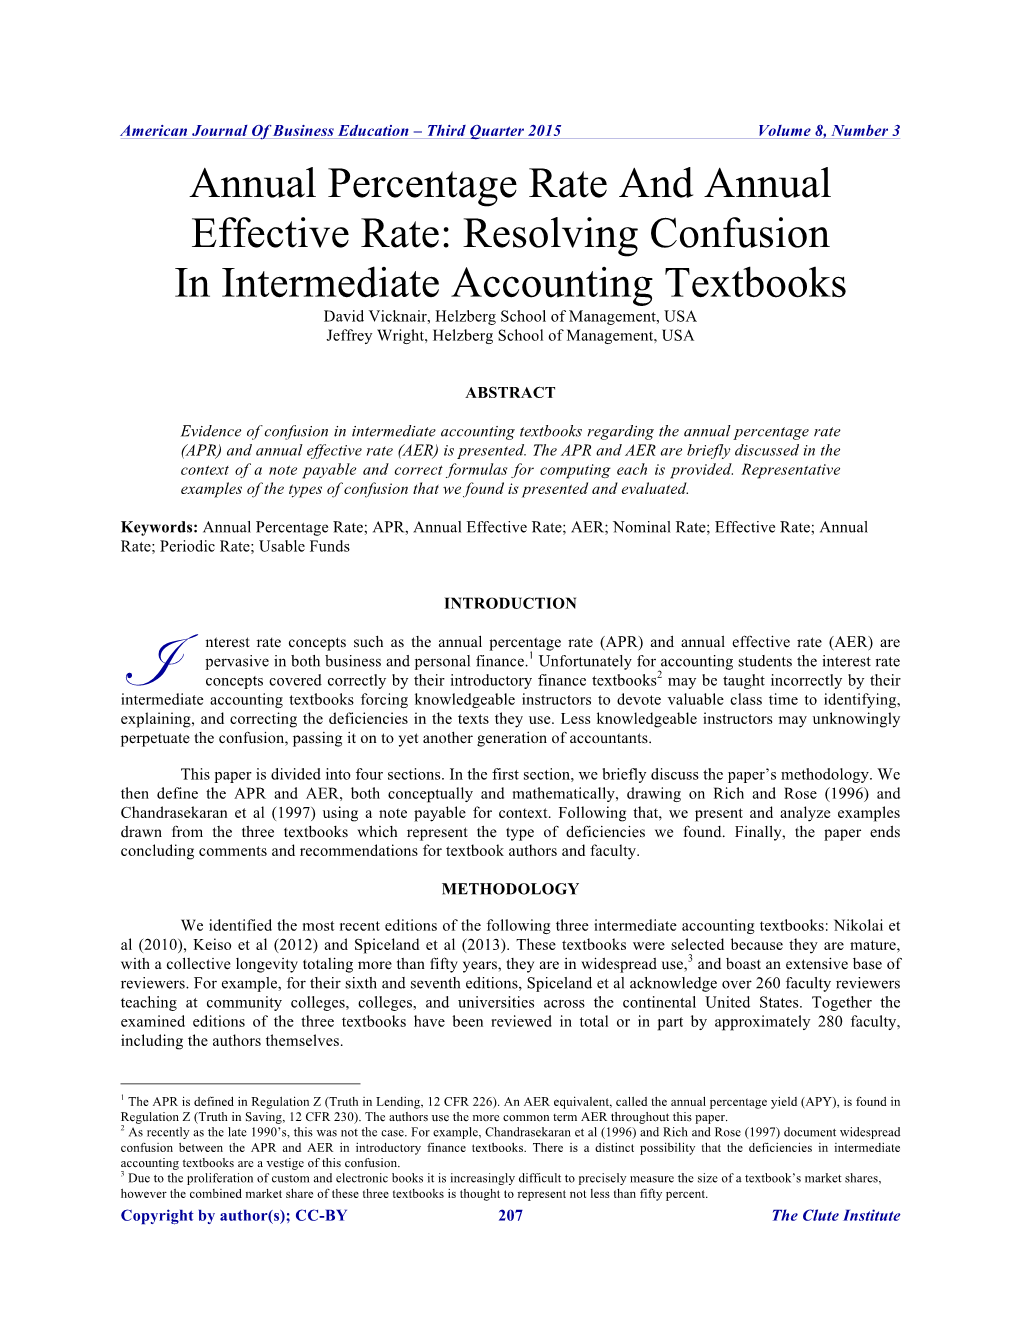 Annual Percentage Rate and Annual Effective Rate